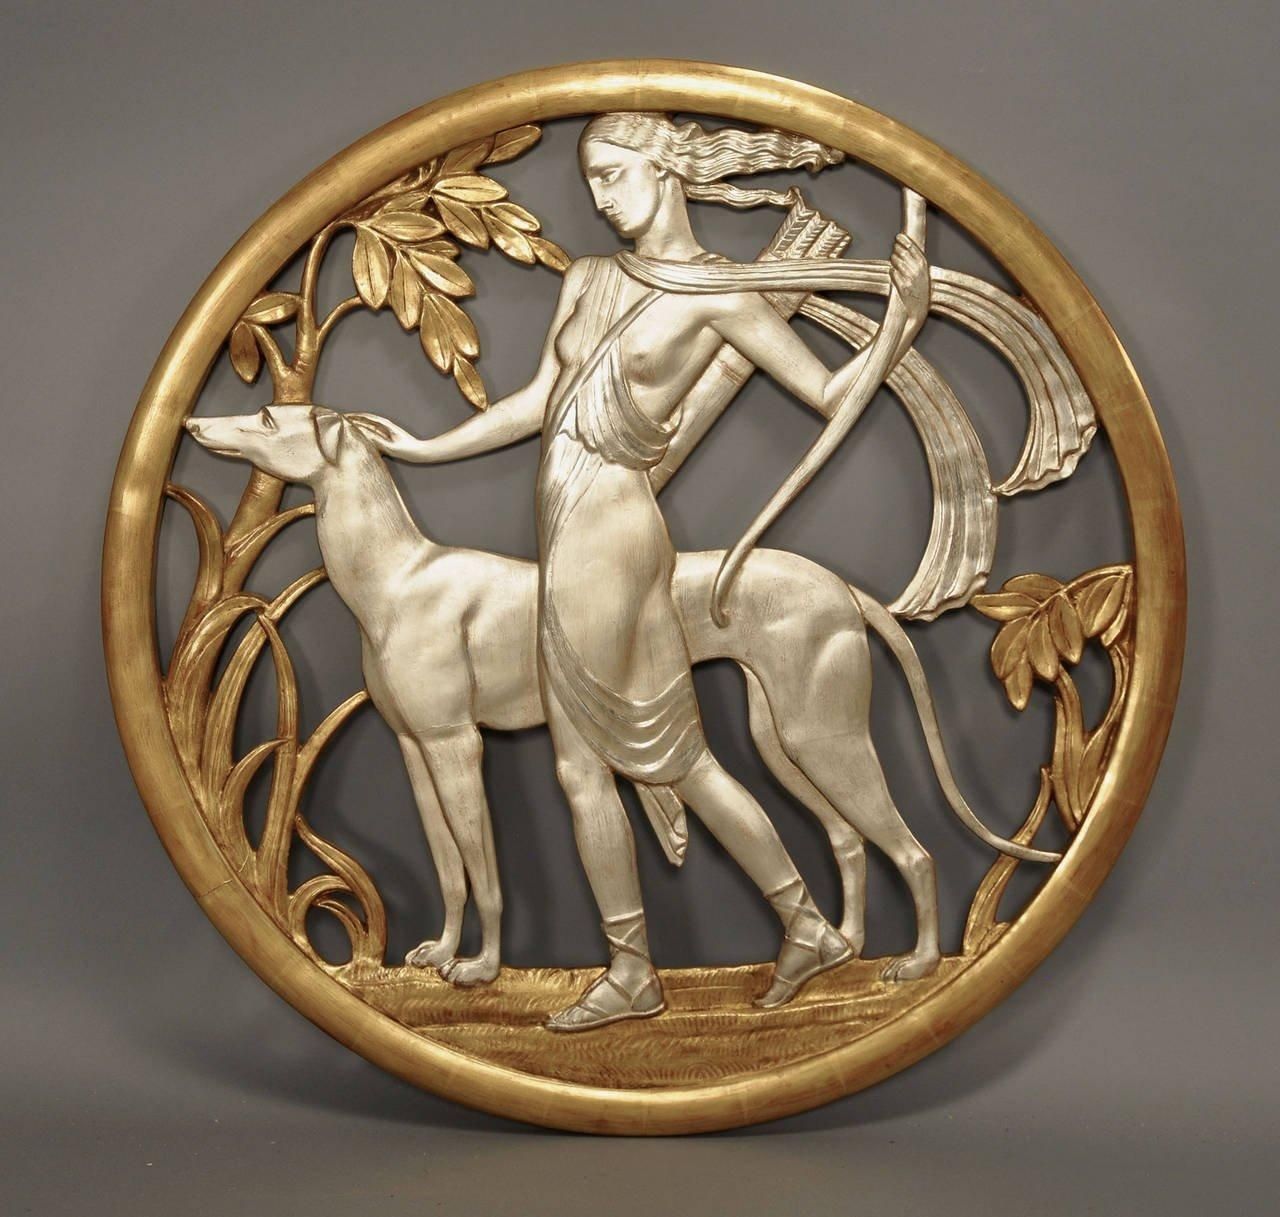 Important Art Deco Mythological Gilt Wall Plaque For Sale At 1stdibs Pertaining To Art Deco Metal Wall Art (Photo 19 of 20)